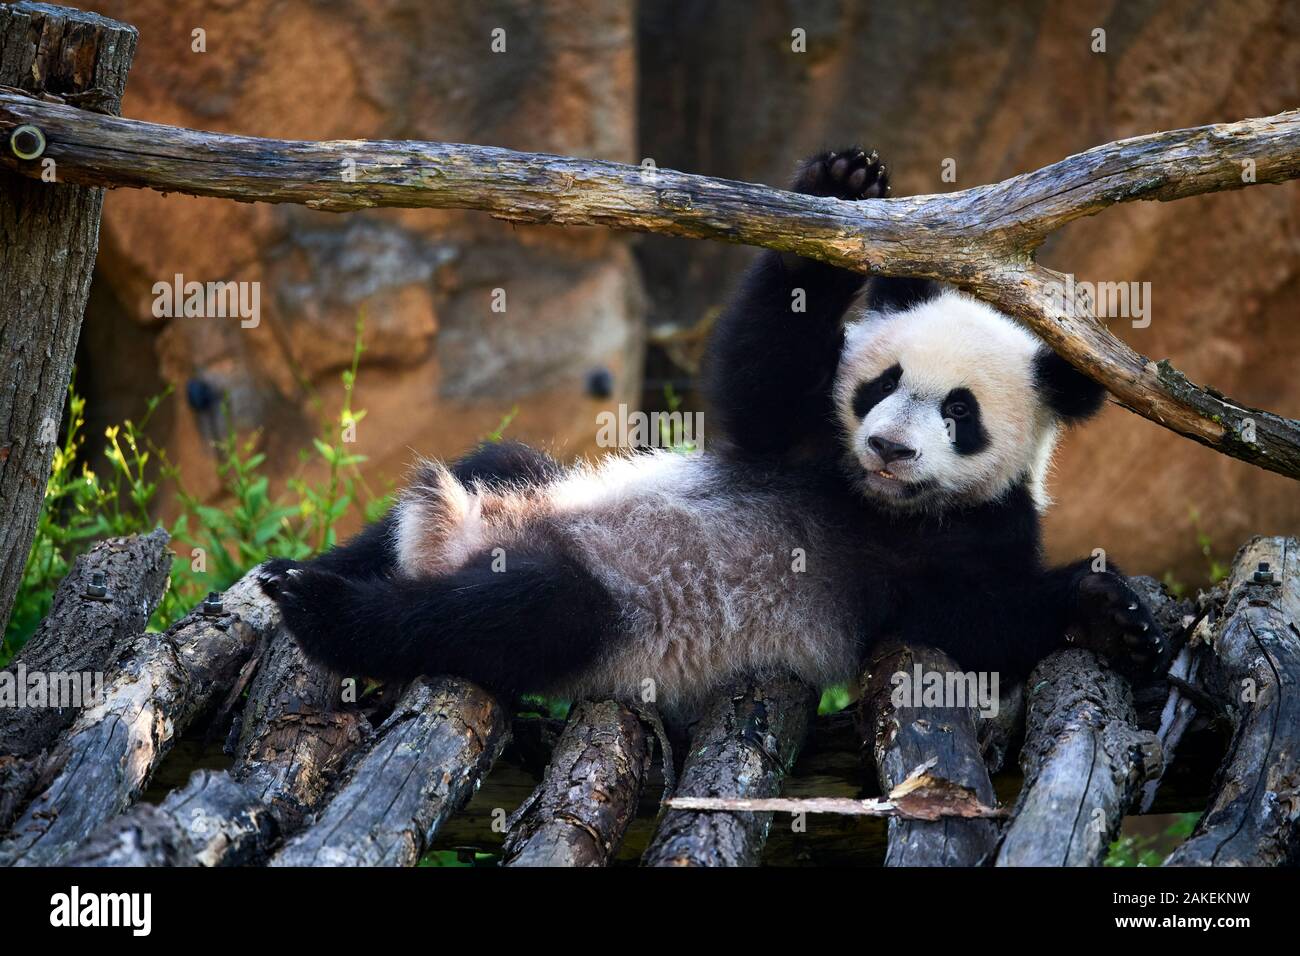 Giant panda (Ailuropoda melanoleuca) cub playing on wooden structure. Yuan Meng, first giant panda ever born in France,  age 10 months, Captive at Beauval Zoo, Saint Aignan sur Cher, France Stock Photo